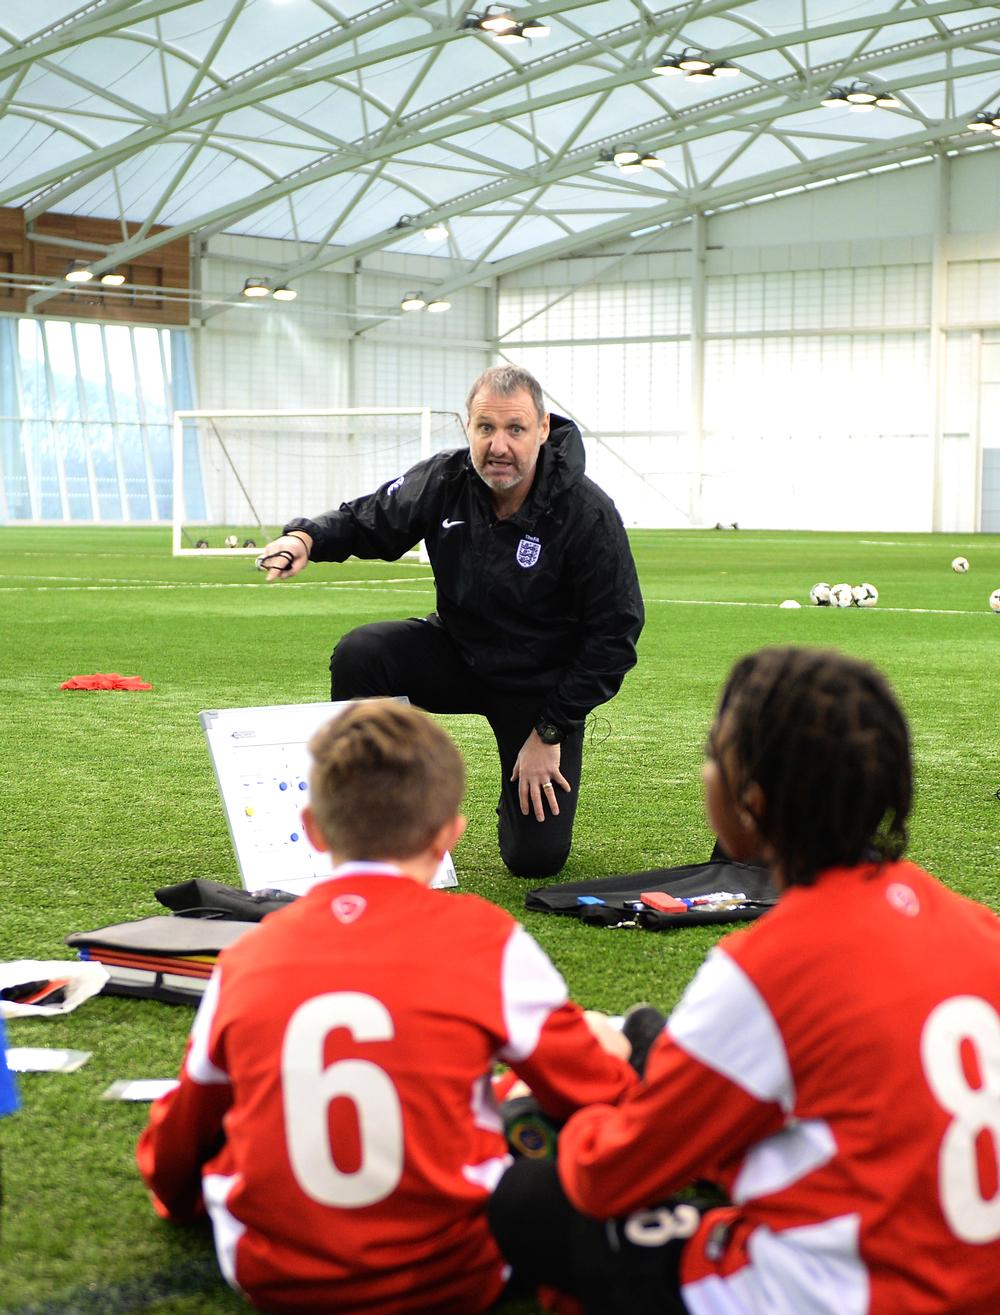 All of the FA’s coaching courses and frameworks are now devised at St George’s Park, Burton / Tony Marshall/The FA/Getty Images